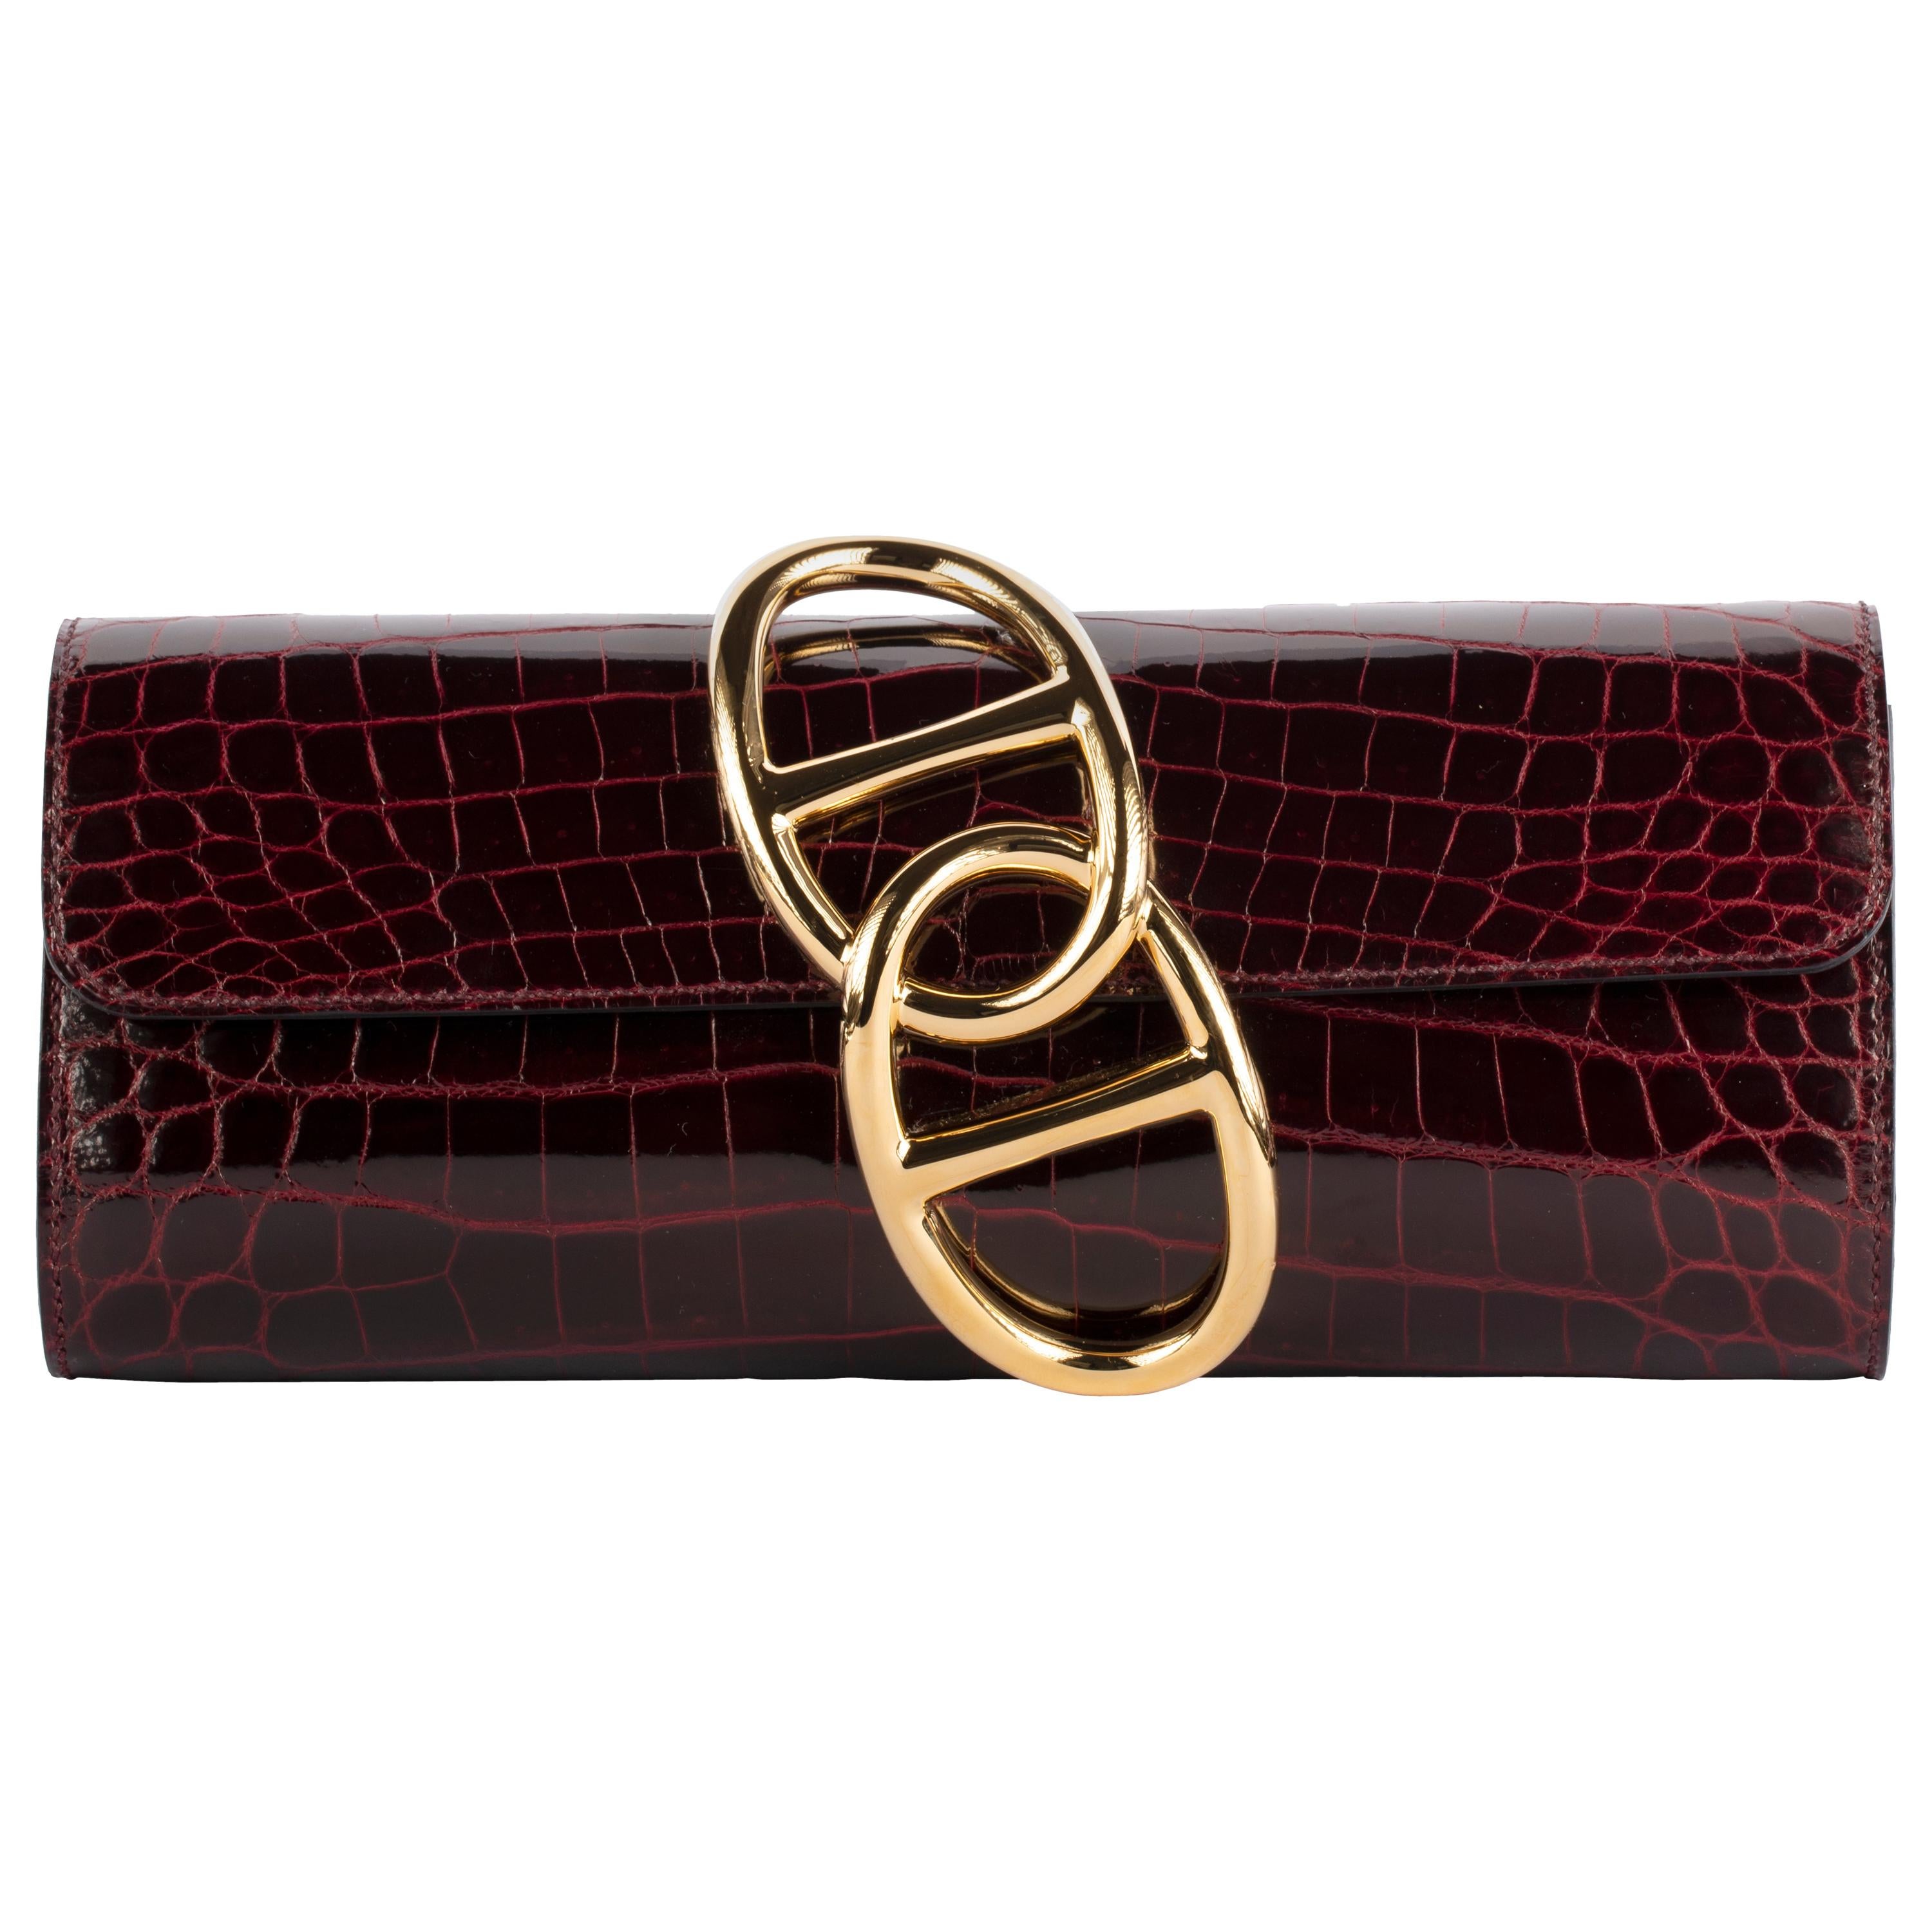 1stdibs Exclusive Hermes Egee Bordeaux Shiny Niloticus Gold Hardware